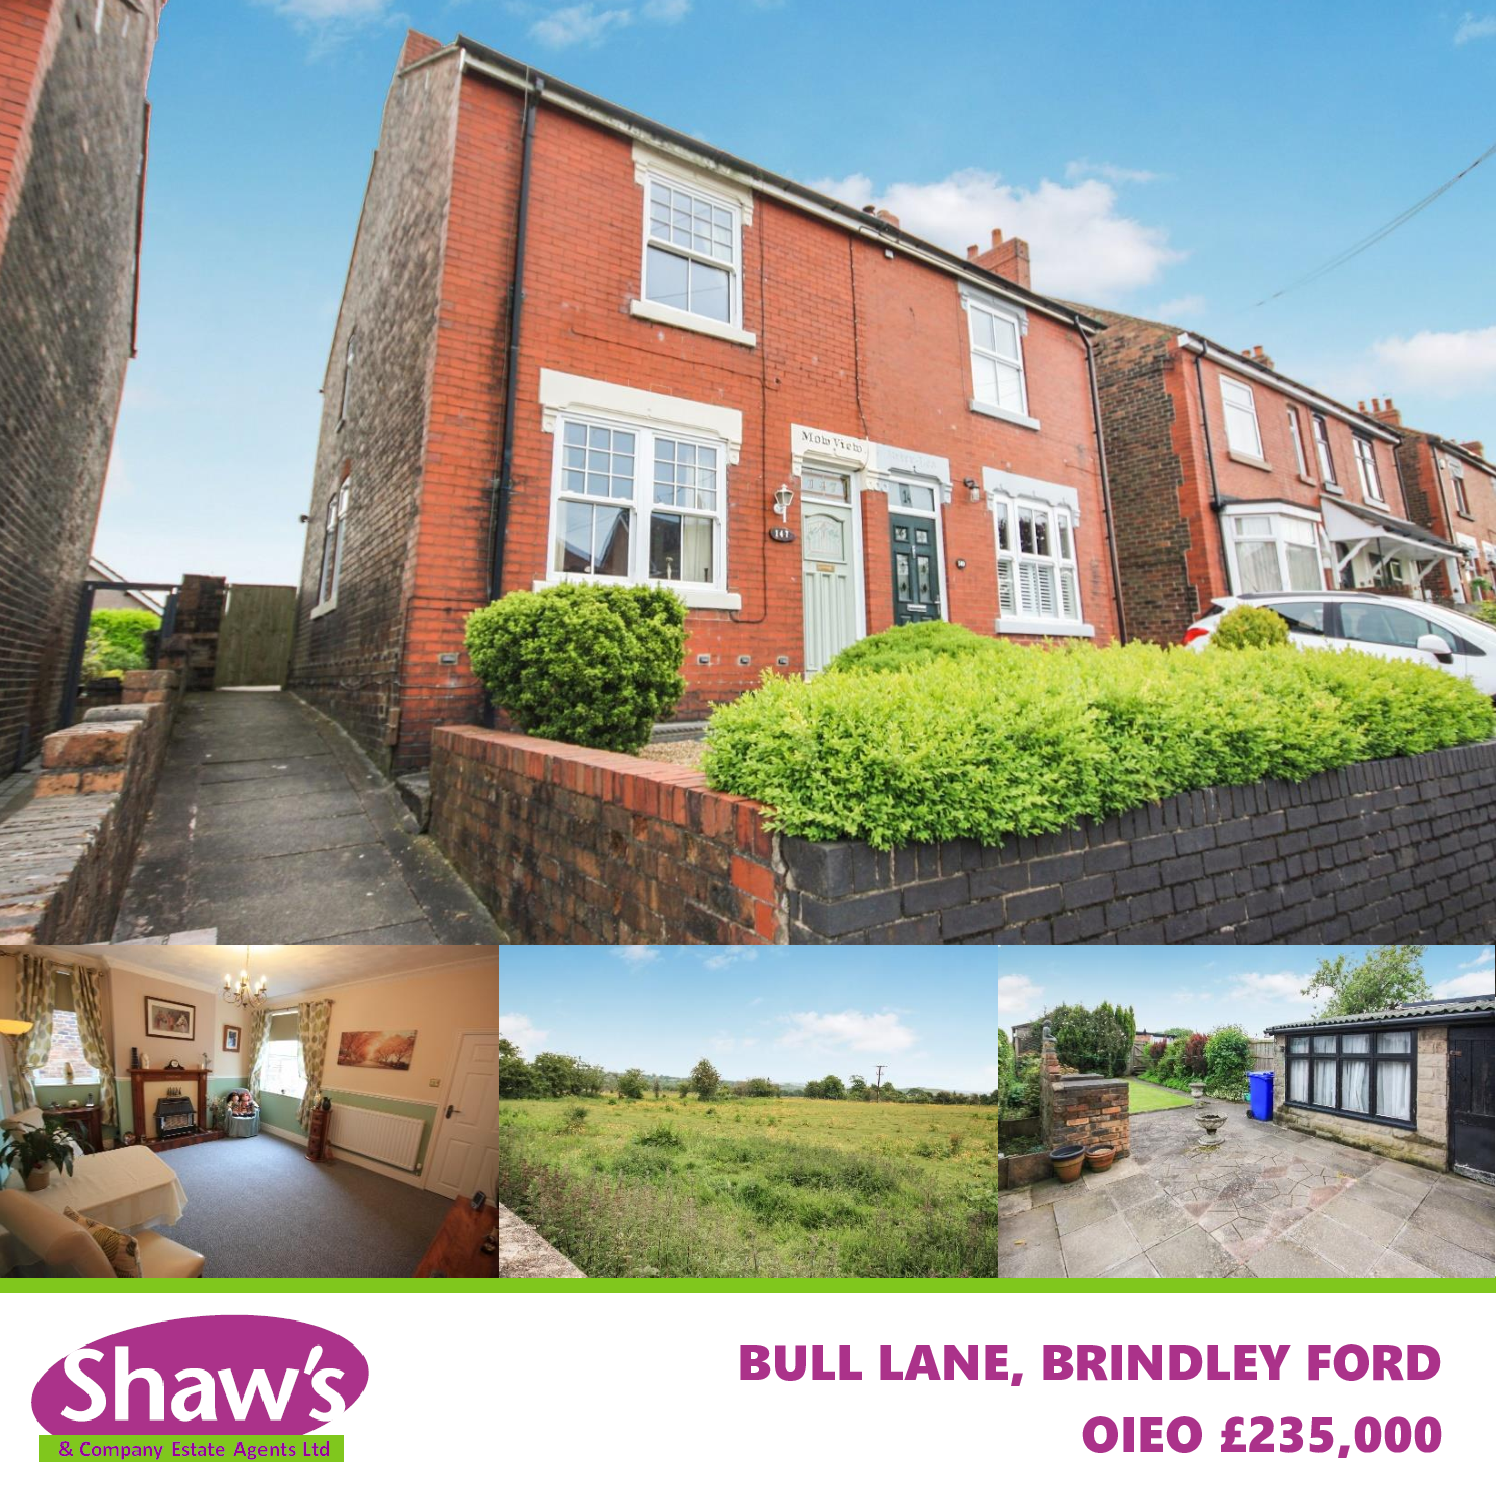 NEW & FEATURED PROPERTIES OF THE WEEK